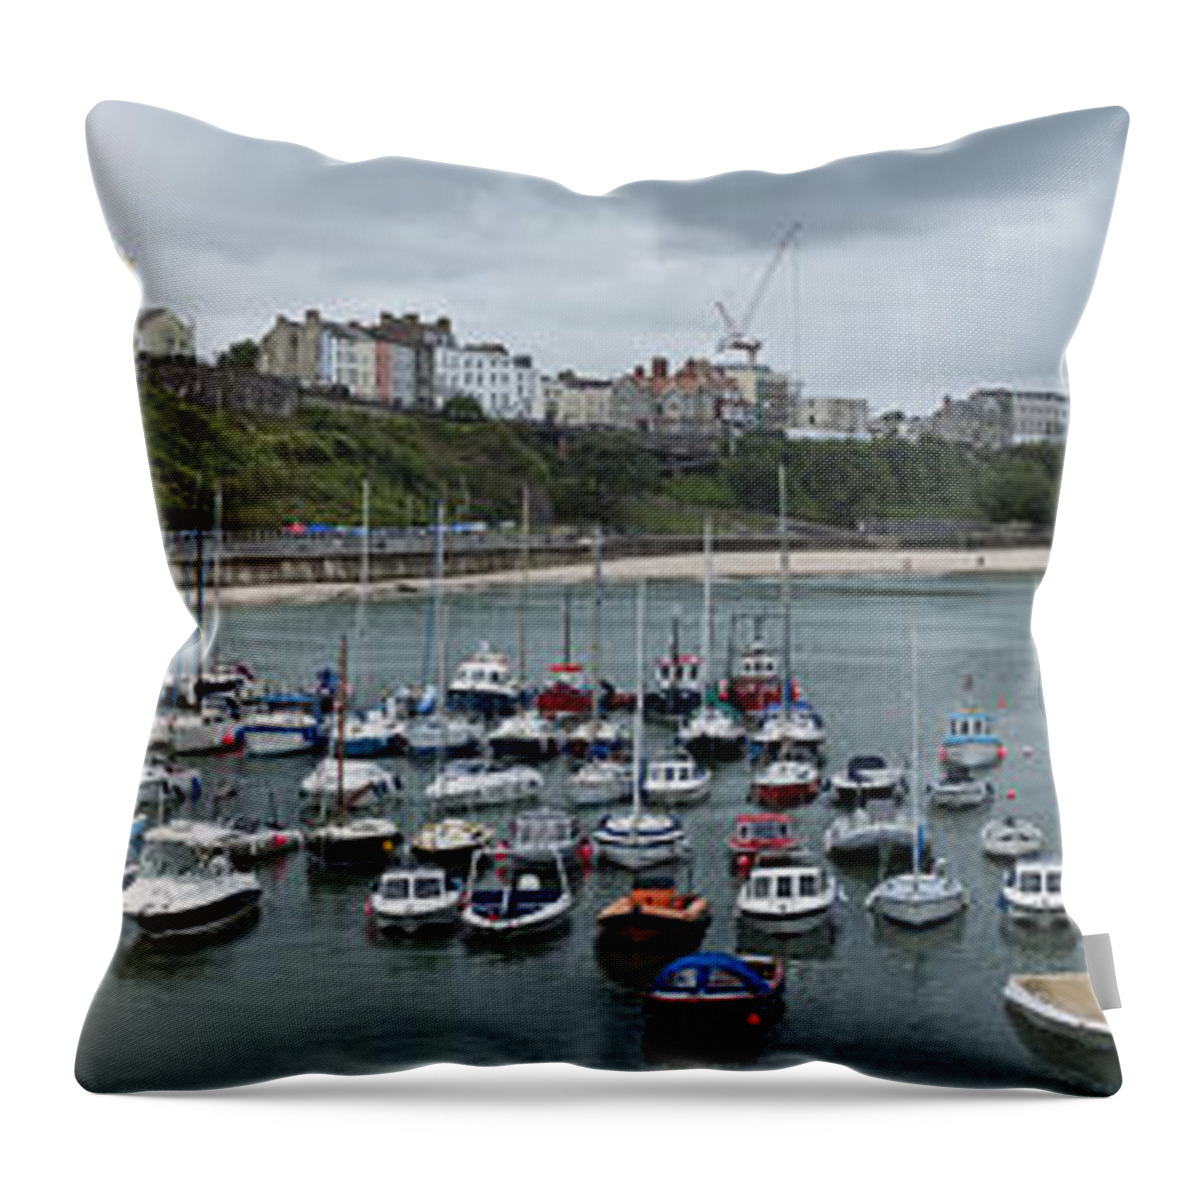 Tenby Throw Pillow featuring the photograph Tenby Harbour Panorama by Steve Purnell